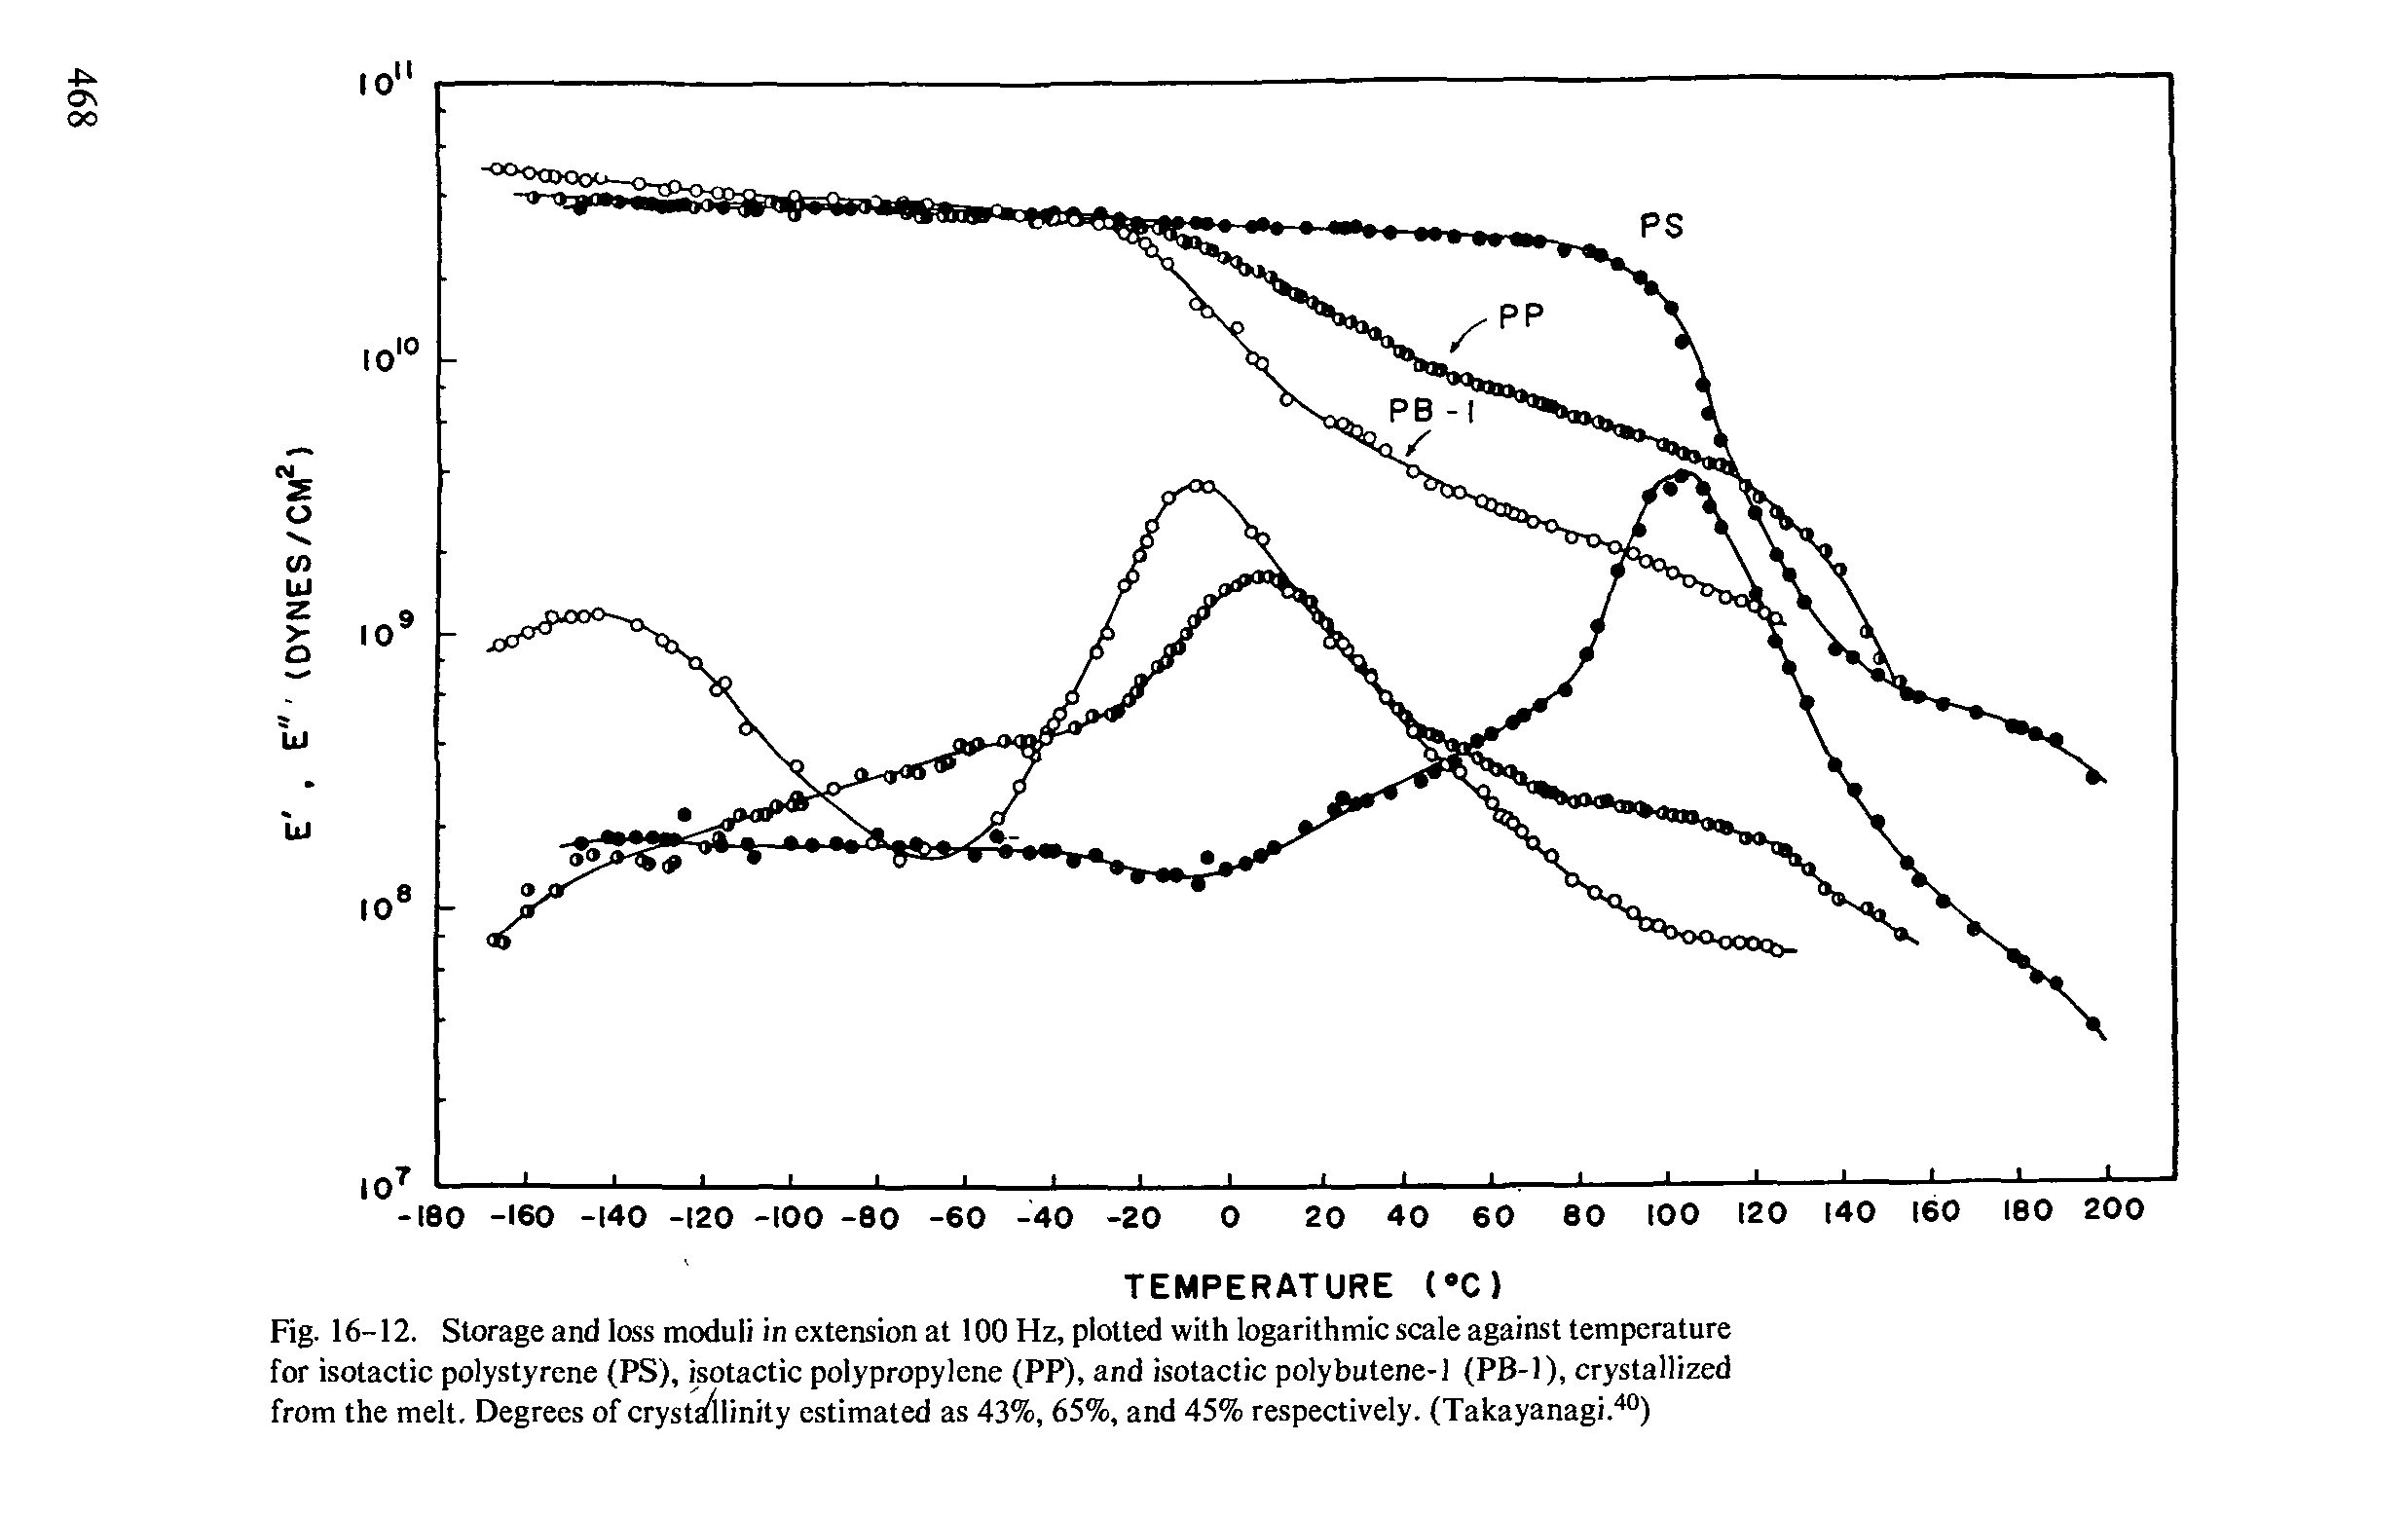 Fig. 16-12. Storage and loss moduli in extension at 100 Hz, plotted with logarithmic scale against temperature for isotactic polystyrene (PS), isotactic polypropylene (PP), and isotactic polybutene-1 (PB-1), crystallized from the melt. Degrees of crystsdlinity estimated as 43%, 65%, and 45% respectively. (Takayanagi. )...